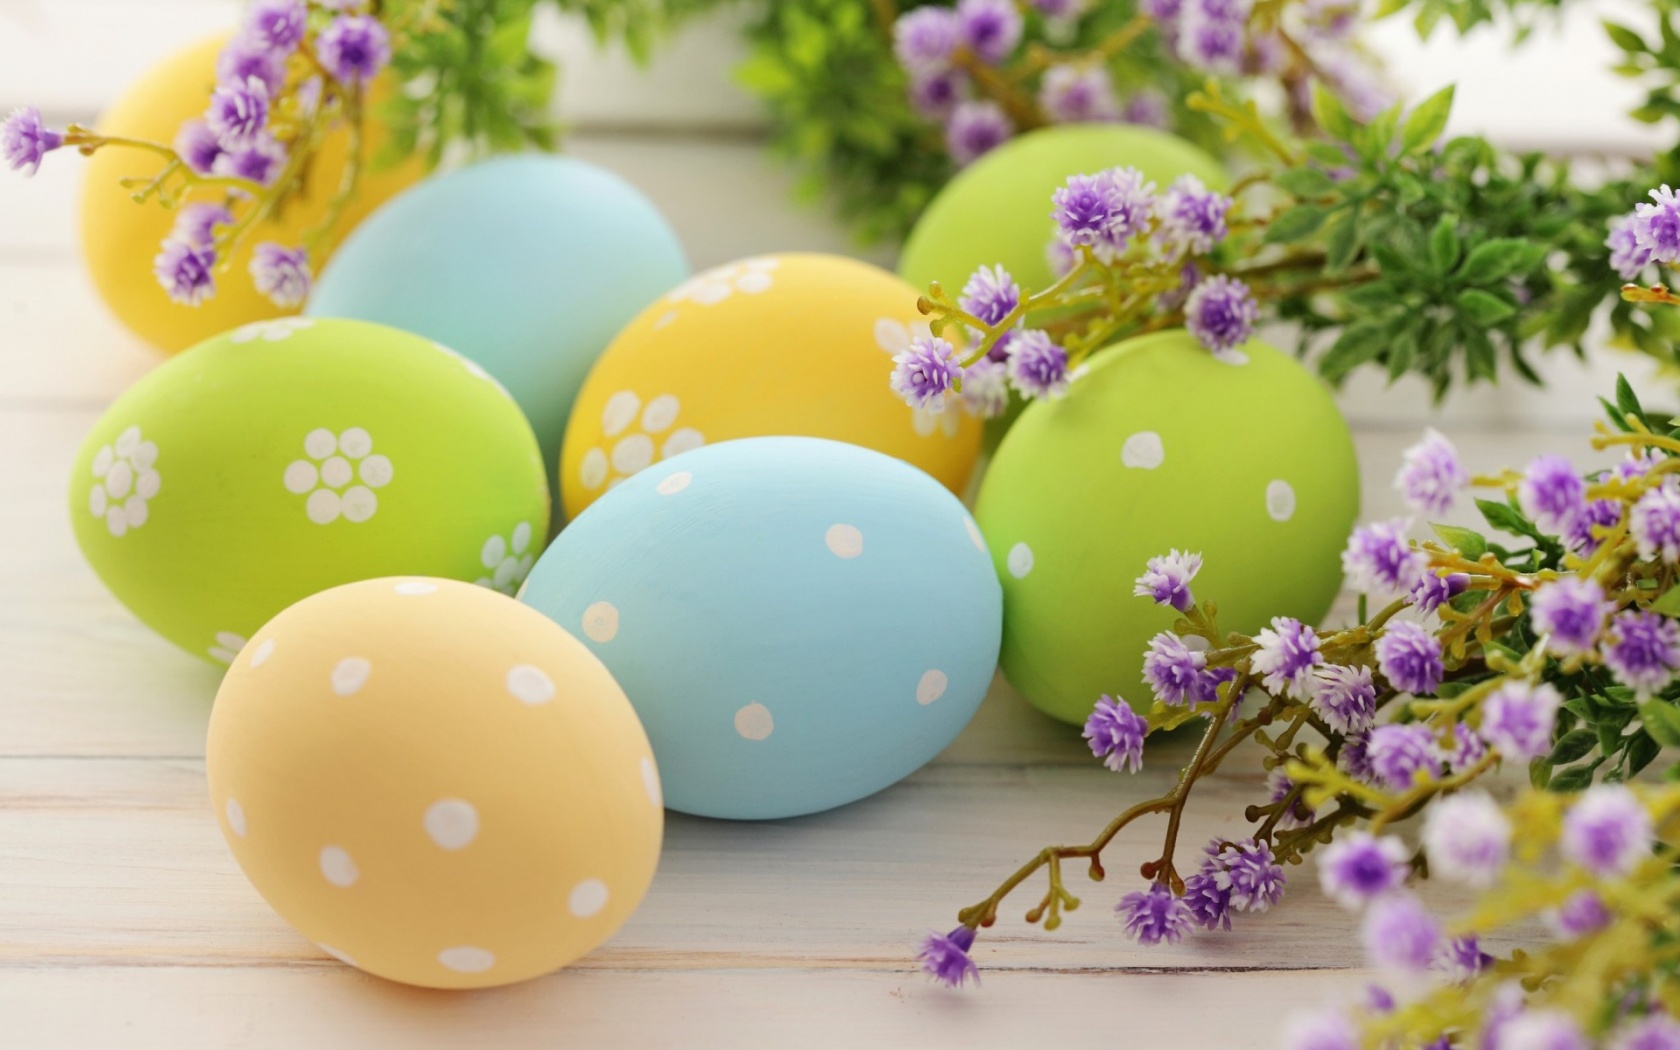 Wallpaper Easter Religious Image High Definition